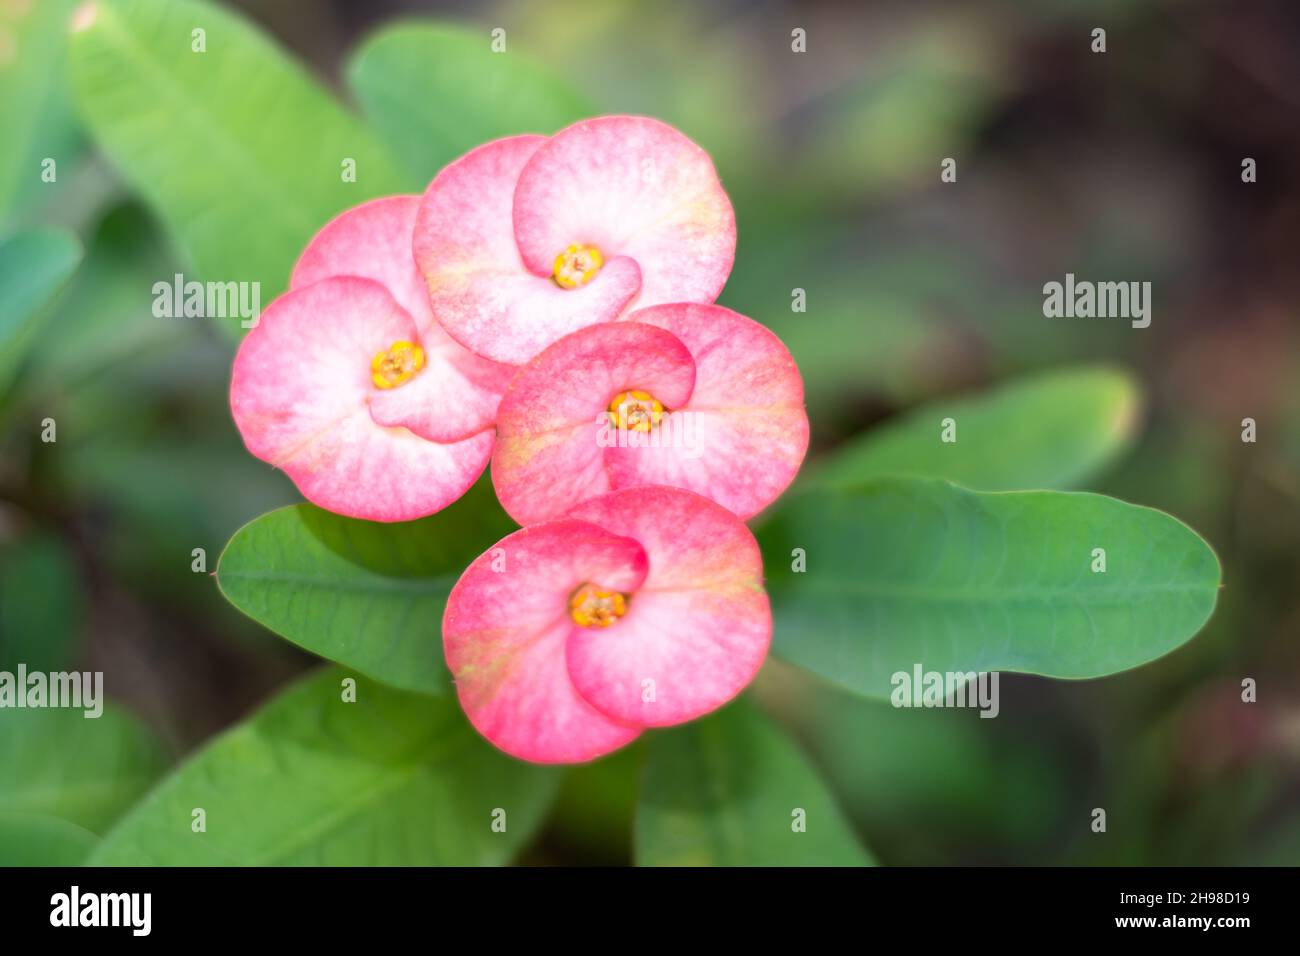 Cluster of pink colored Crown of Thorns, Euphorbia milii, flowers with leaves Stock Photo